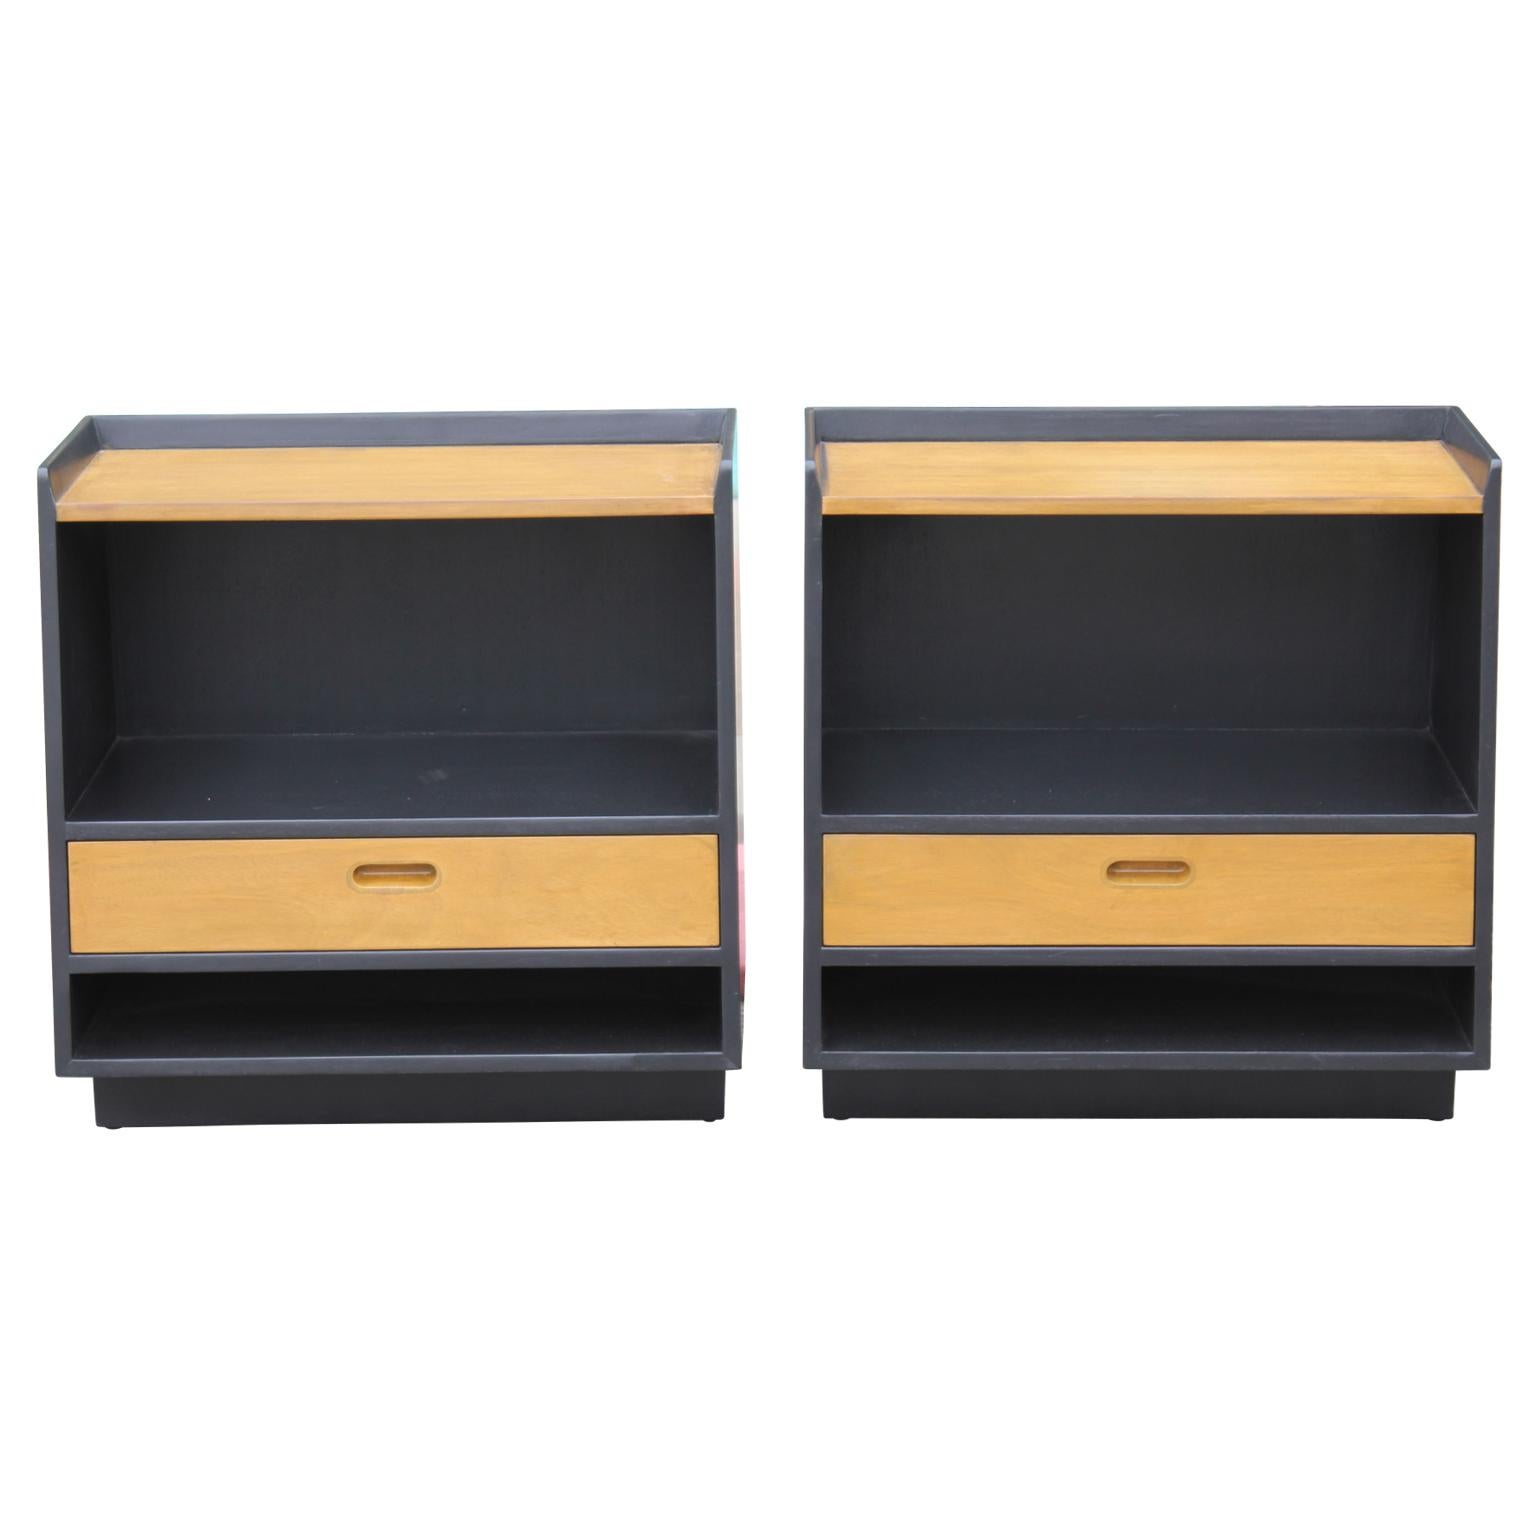 Gorgeous pair of two-toned angular end tables or nightstands by Edward Wormley for Dunbar.